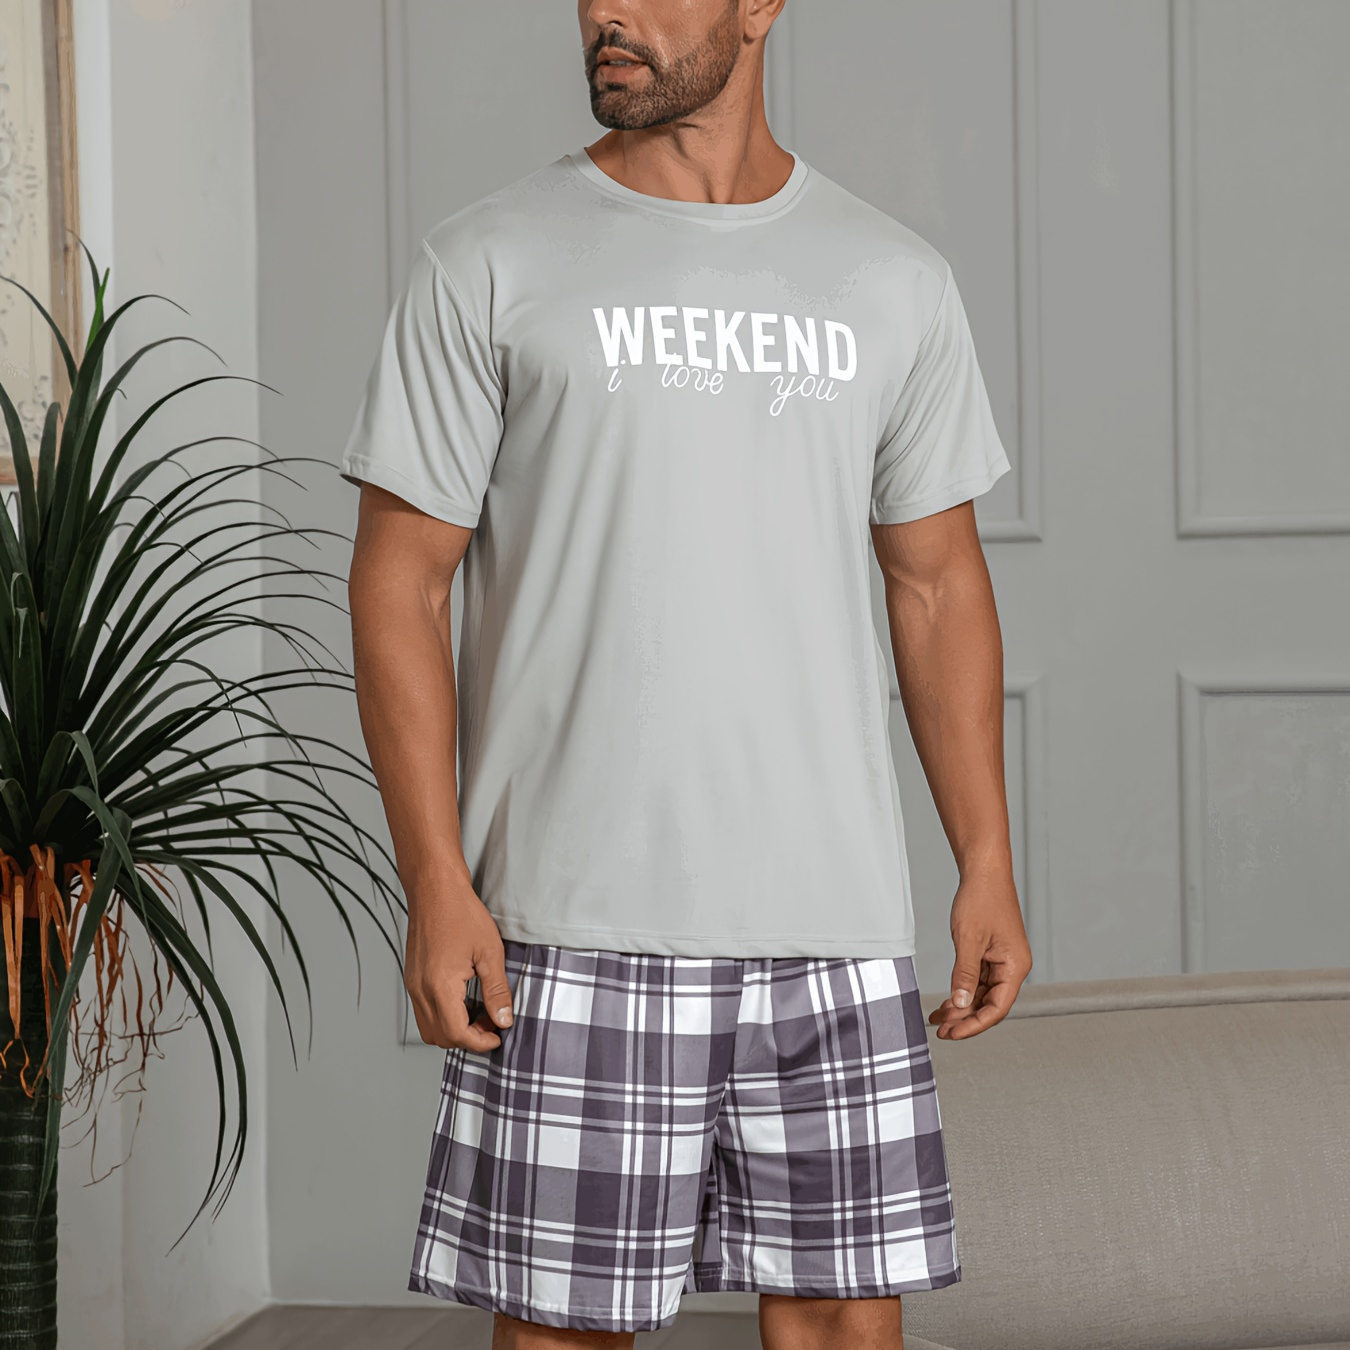 

Men's Summer Casual Grey Letter Print Short Sleeve T-shirt & Plaid Shorts Pajama Set, Soft Comfortable Sleep Set For Home And Outdoor Wearing